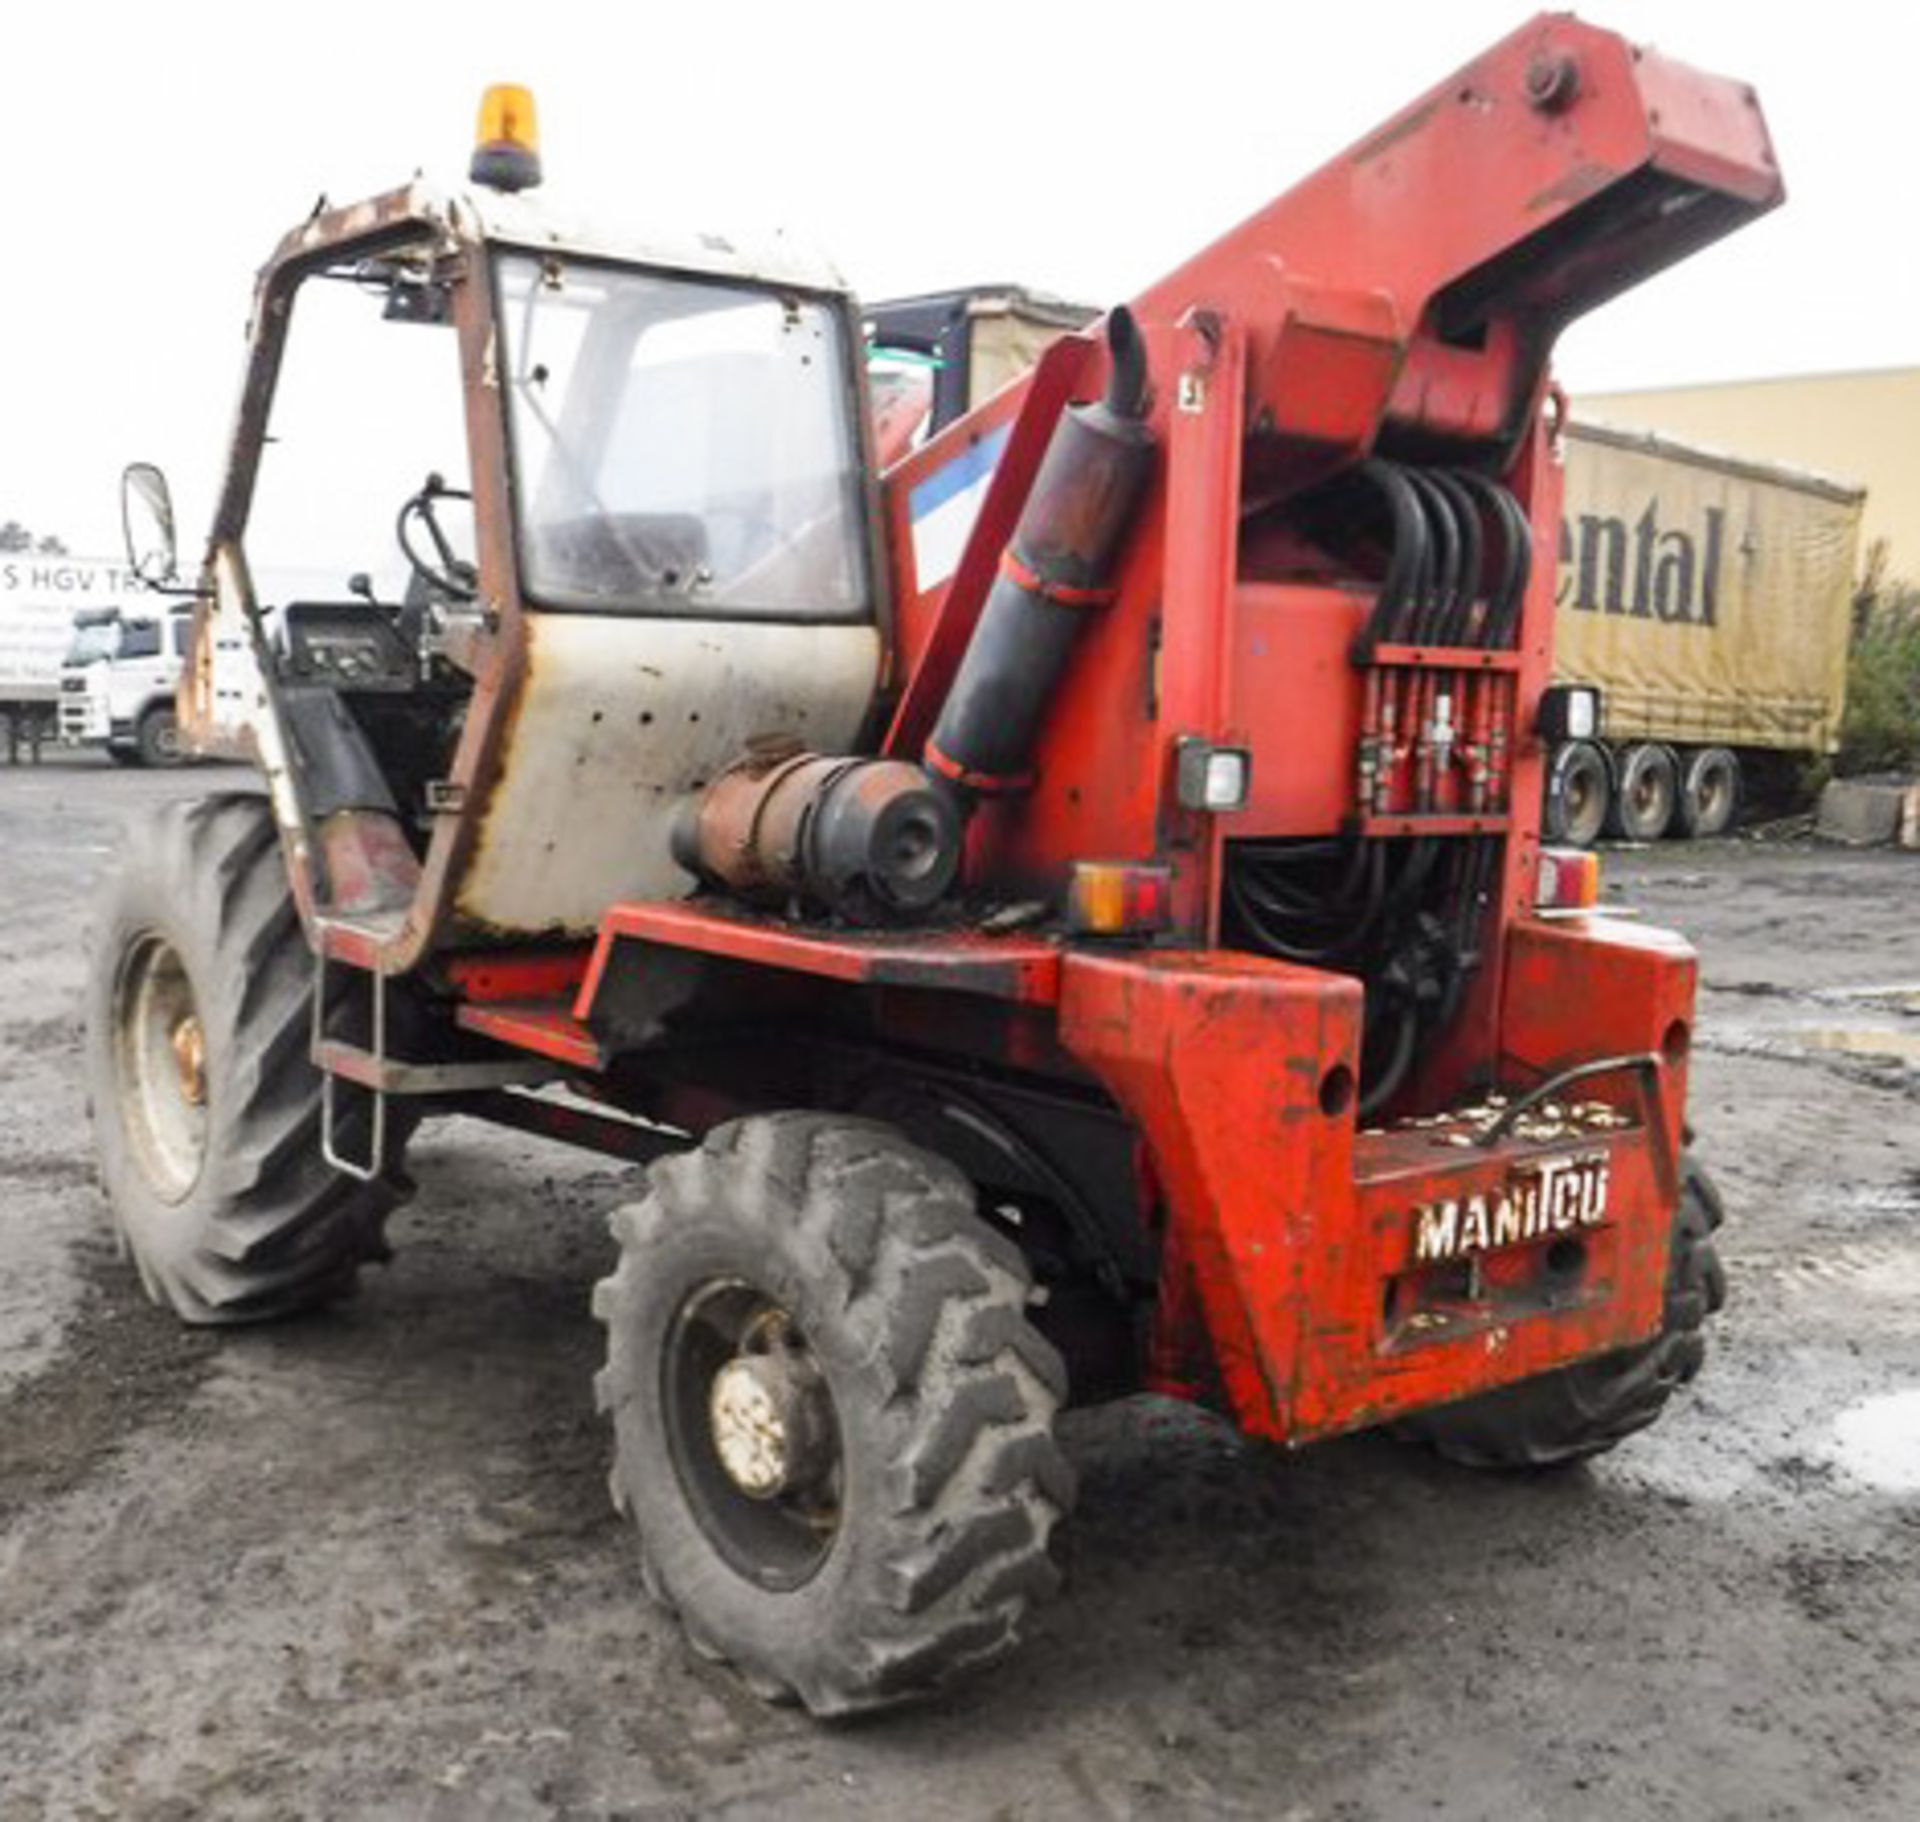 1989 MANITOU TURBO, MODEL - MT425CPT, SERIES 2, CHASSIS 185836, 5693HRS (NOT VERIFIED) ** 10% BUYERS - Image 13 of 15